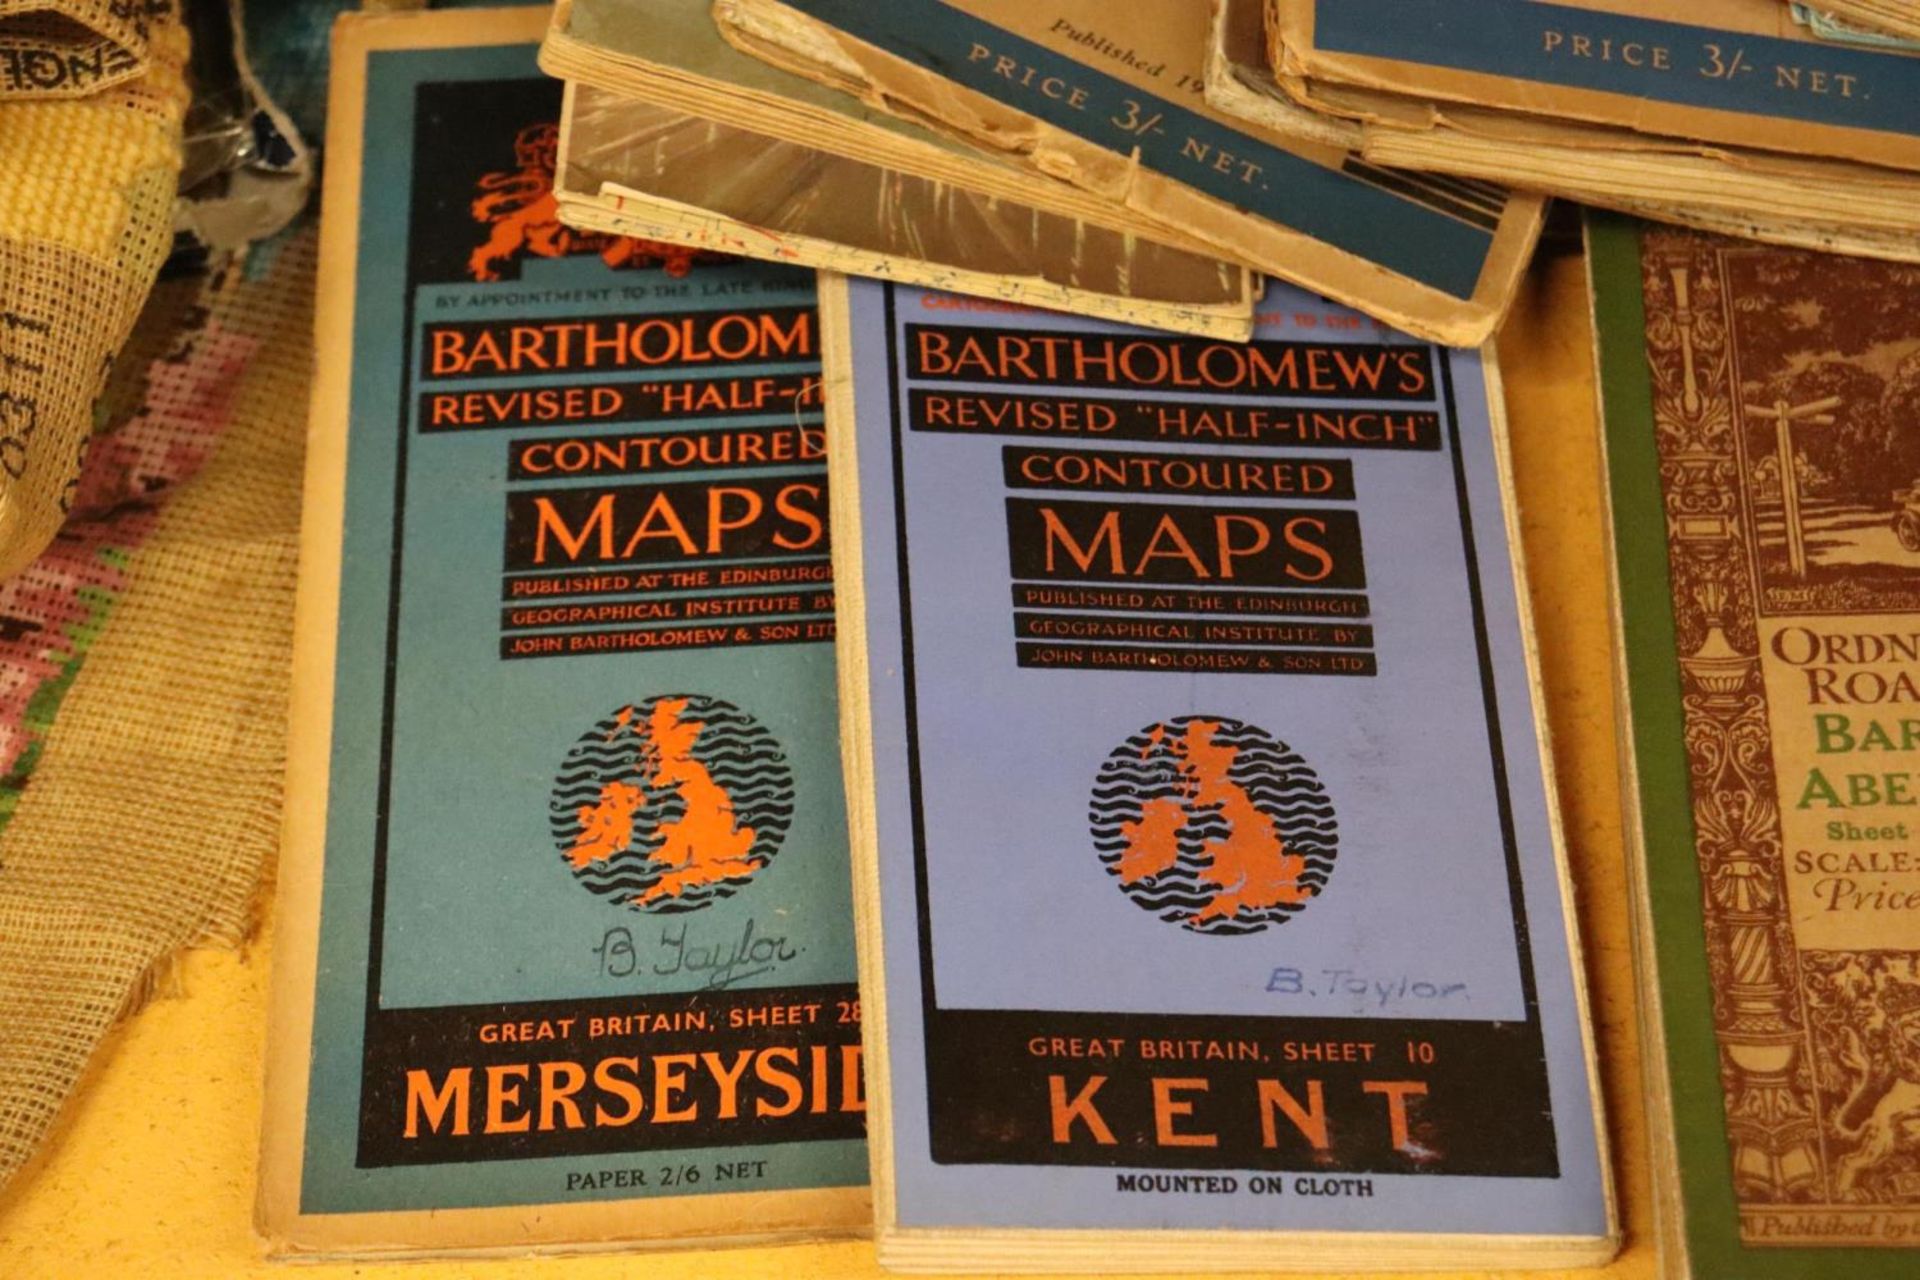 A COLLECTION OF VINTAGE ROAD MAPS TO INCLUDE ORDNANCE SURVEY AND BARTHOLOMEW'S - Image 2 of 4